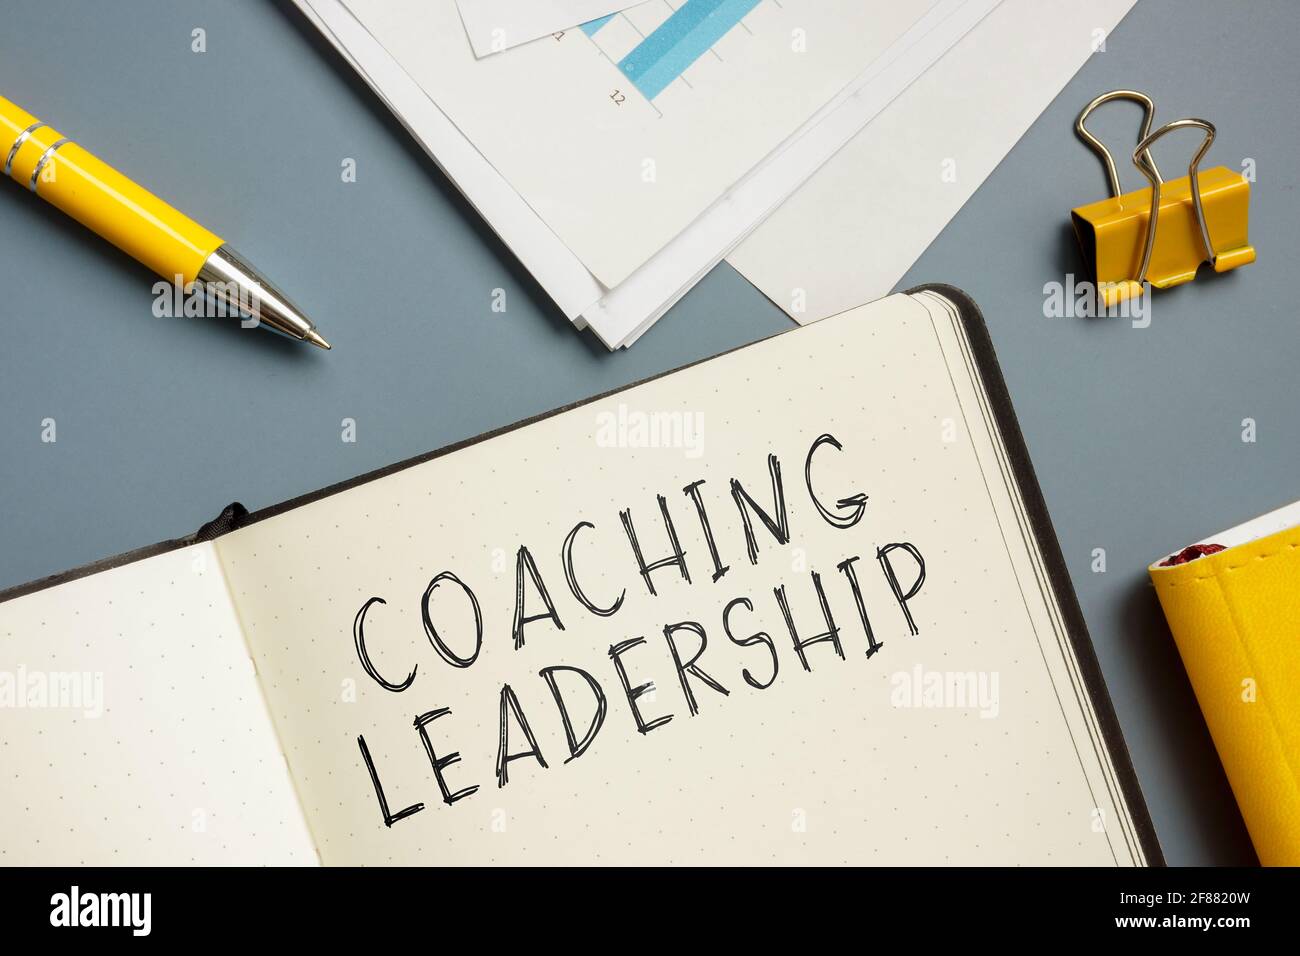 Marks about coaching leadership in the notepad. Stock Photo